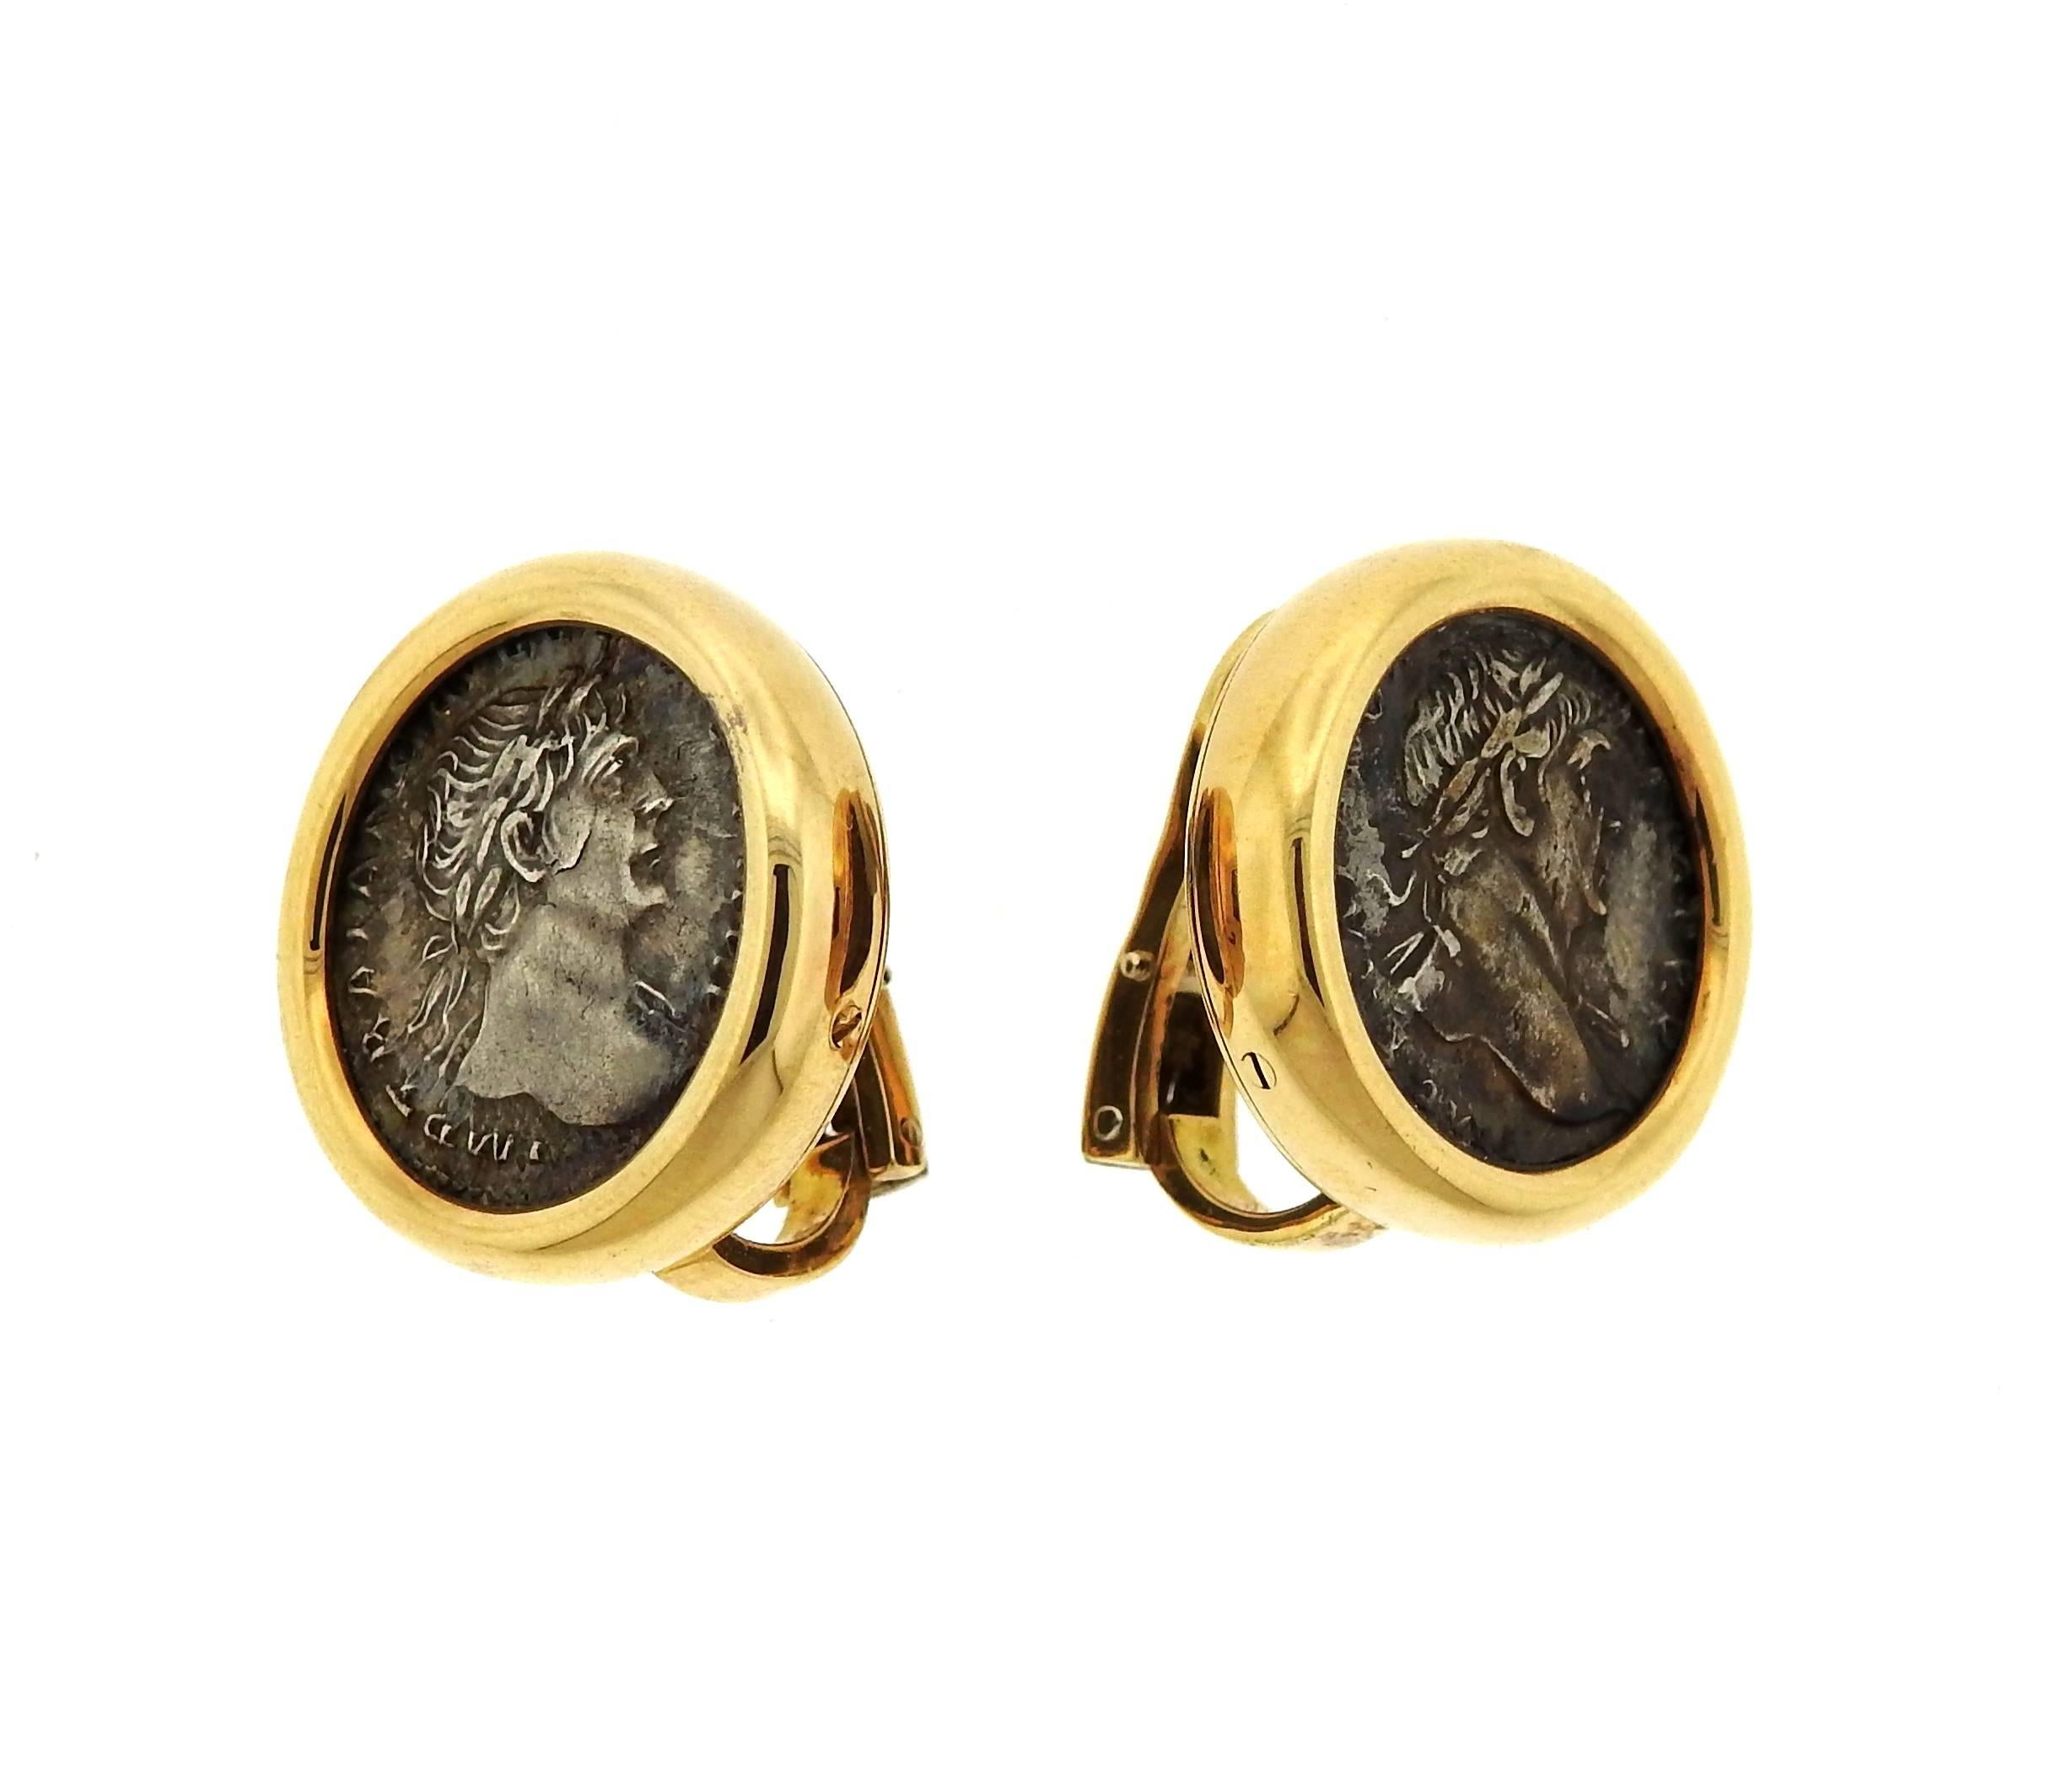 A pair of 18K yellow gold earrings set with ancient coins. The earrings are 21.5mm in diameter.  Marked: Bvlgari, 750, 277 TO, Roma-Traianvs A.D. 98-117.  The earrings weigh 27.1 grams.